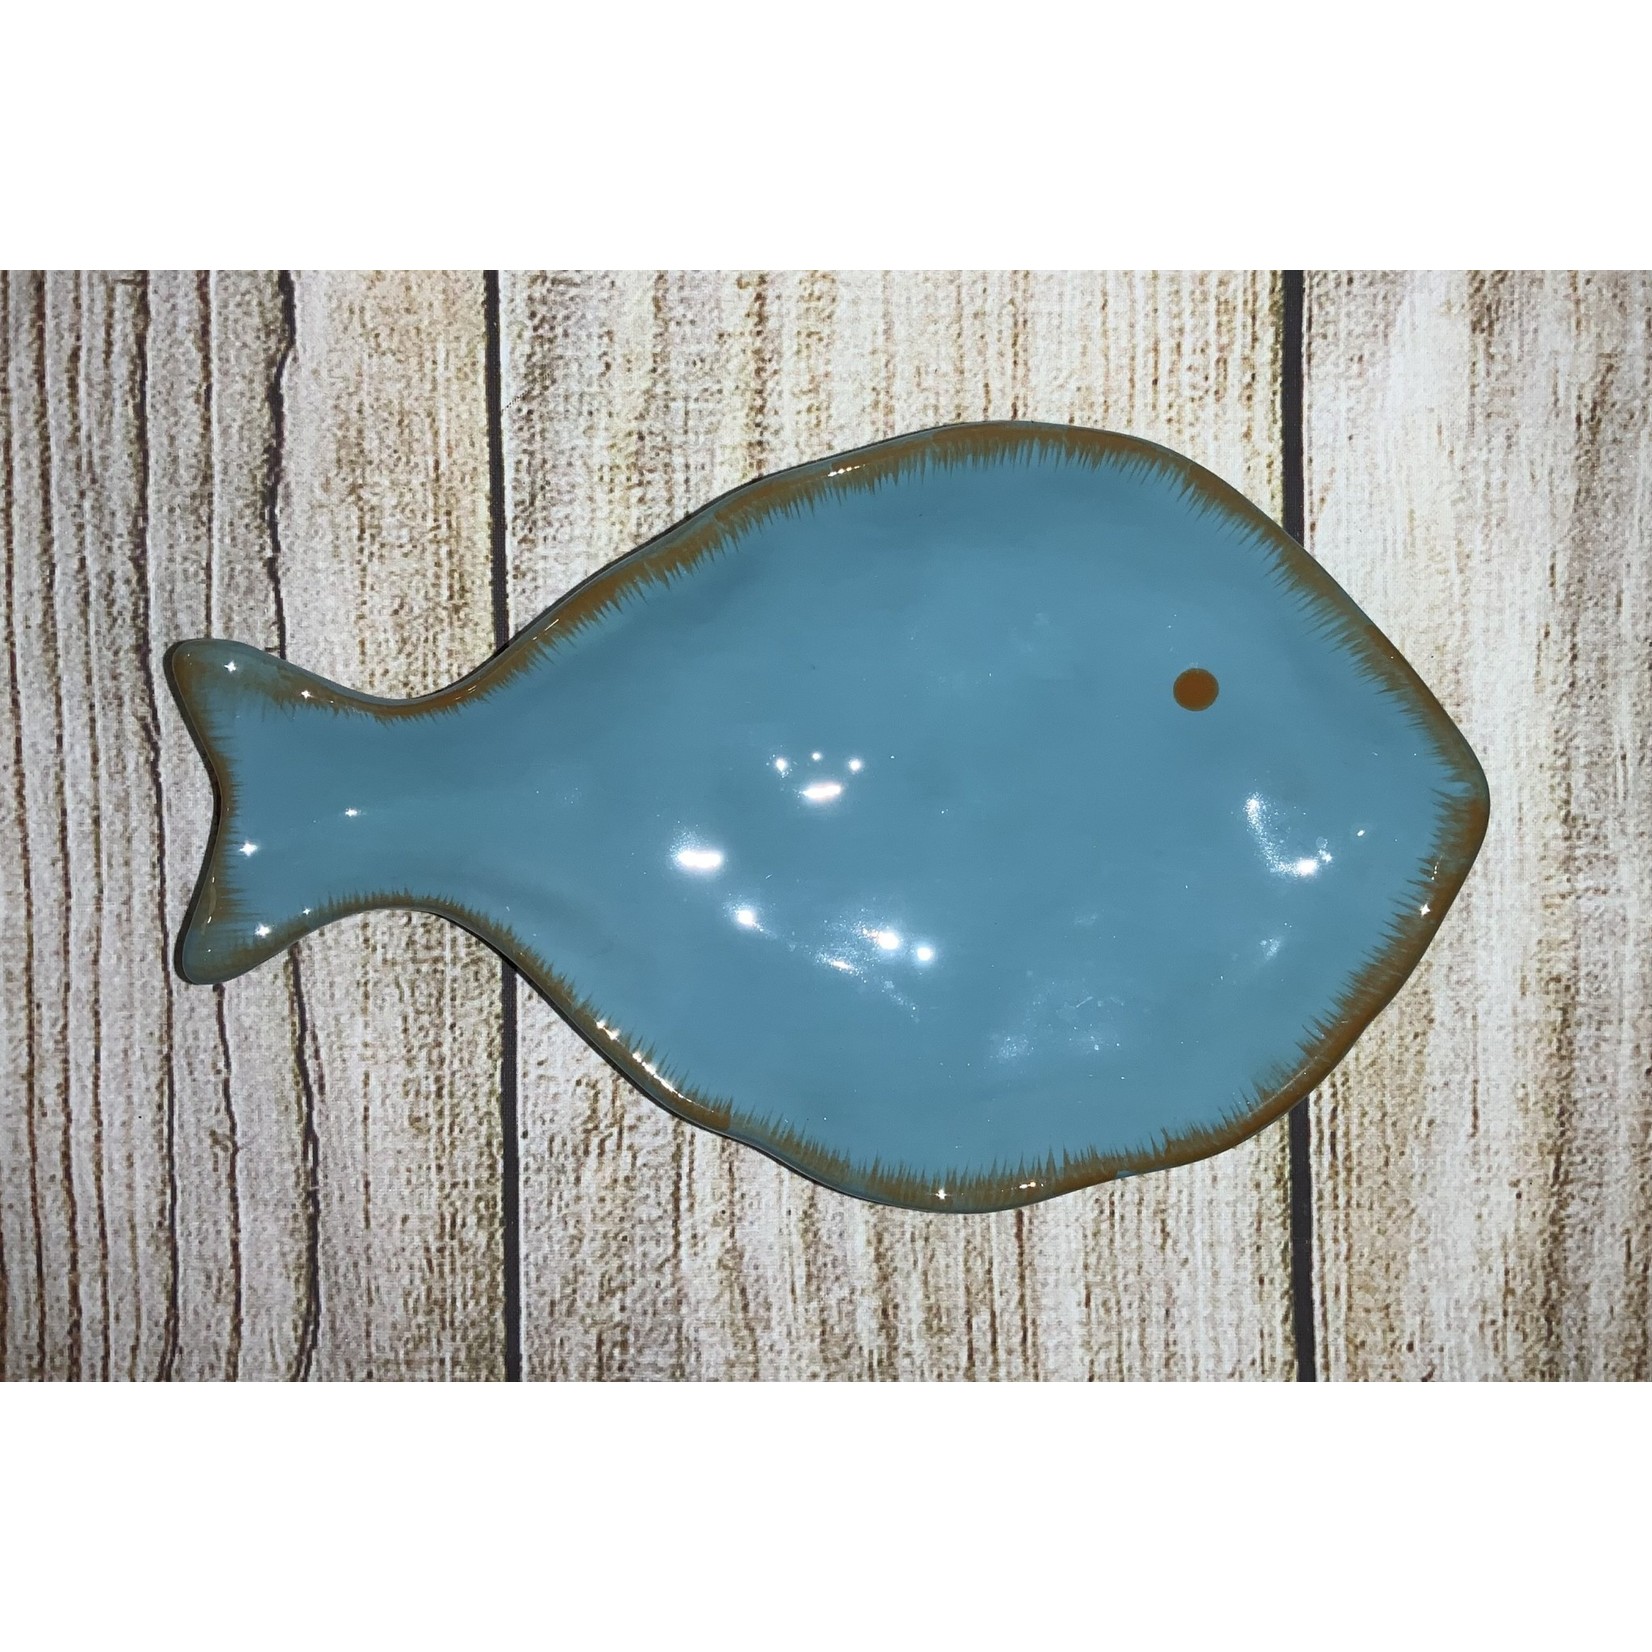 Creative Co-op Ceramic Teal Fish Tray